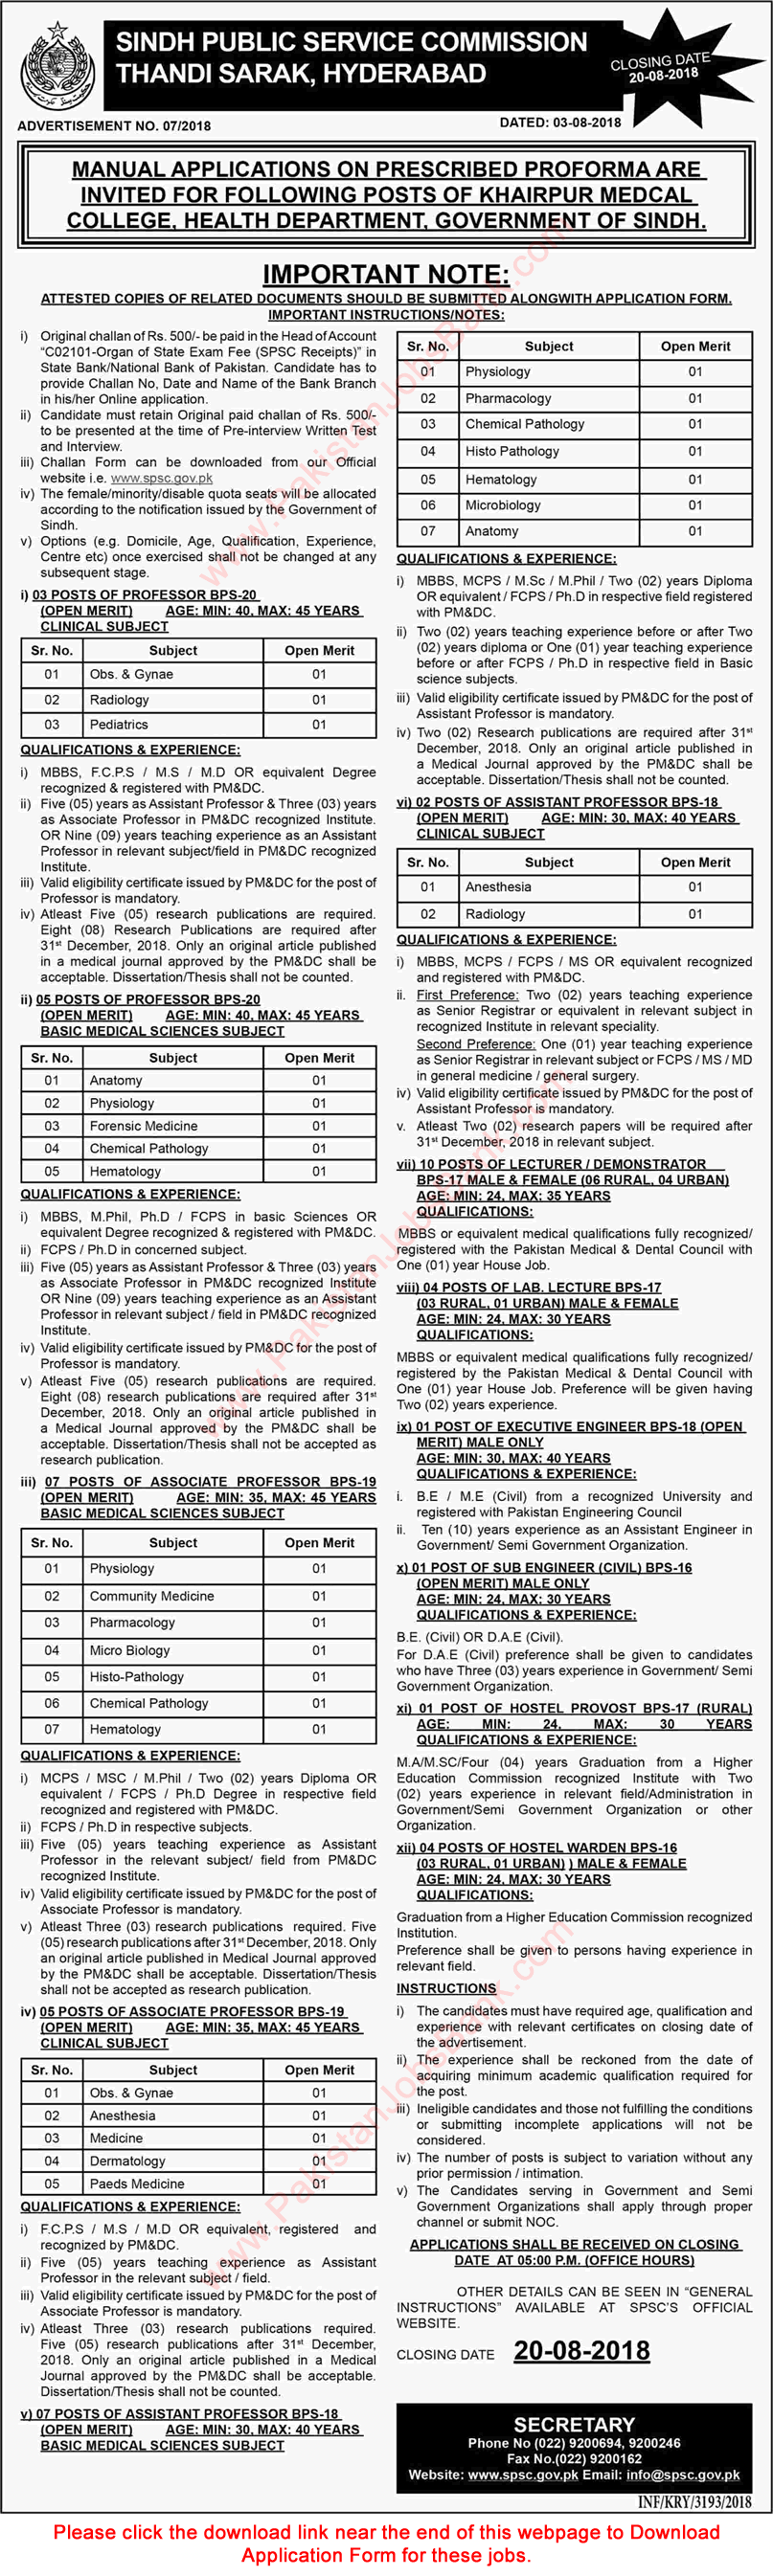 Khairpur Medical College Jobs 2018 August SPSC Apply Online Teaching Faculty & Others Latest